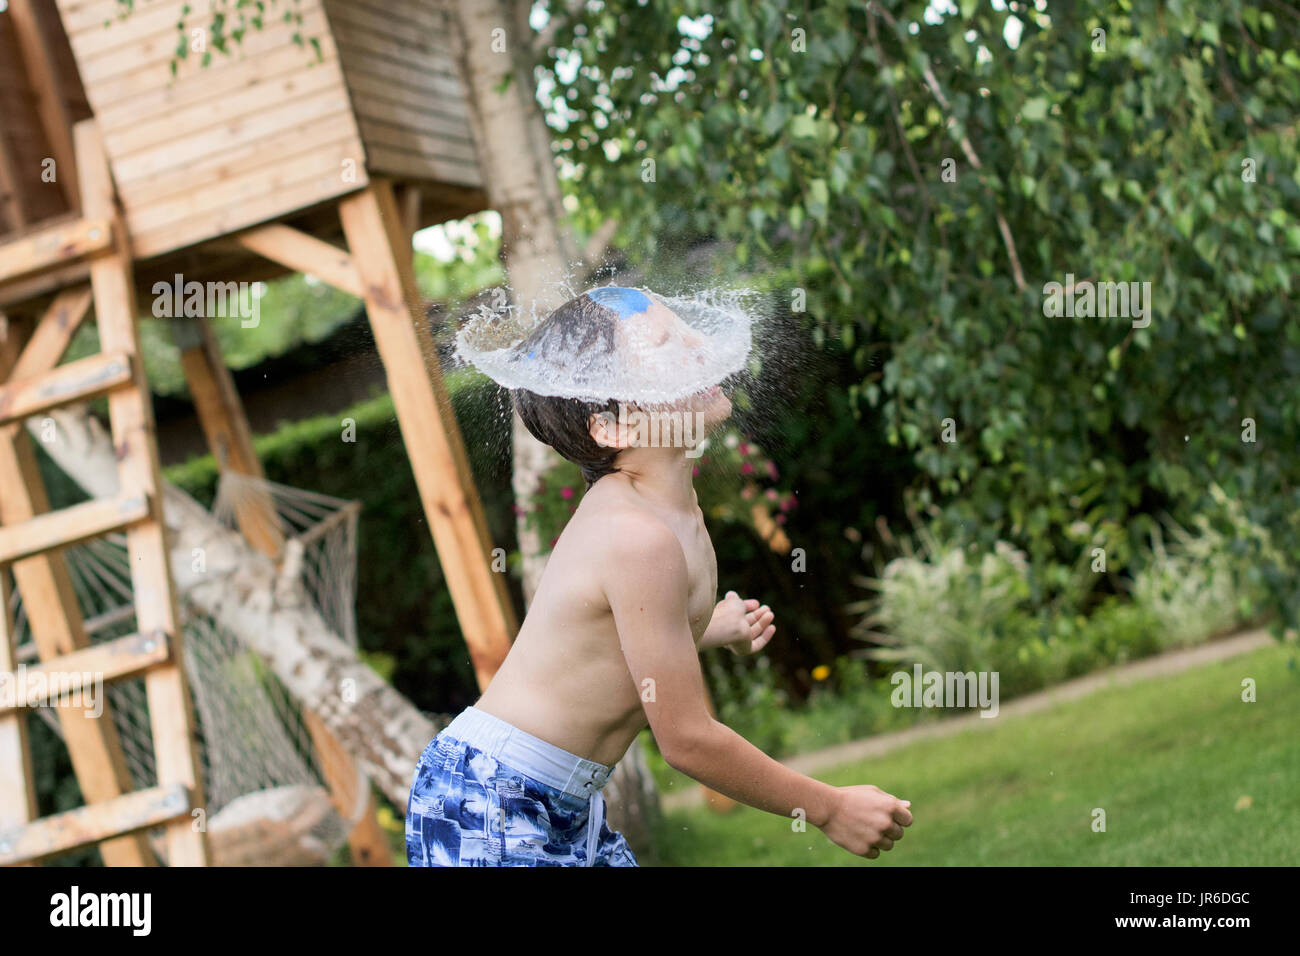 Water bomb landing on a boy's face Stock Photo